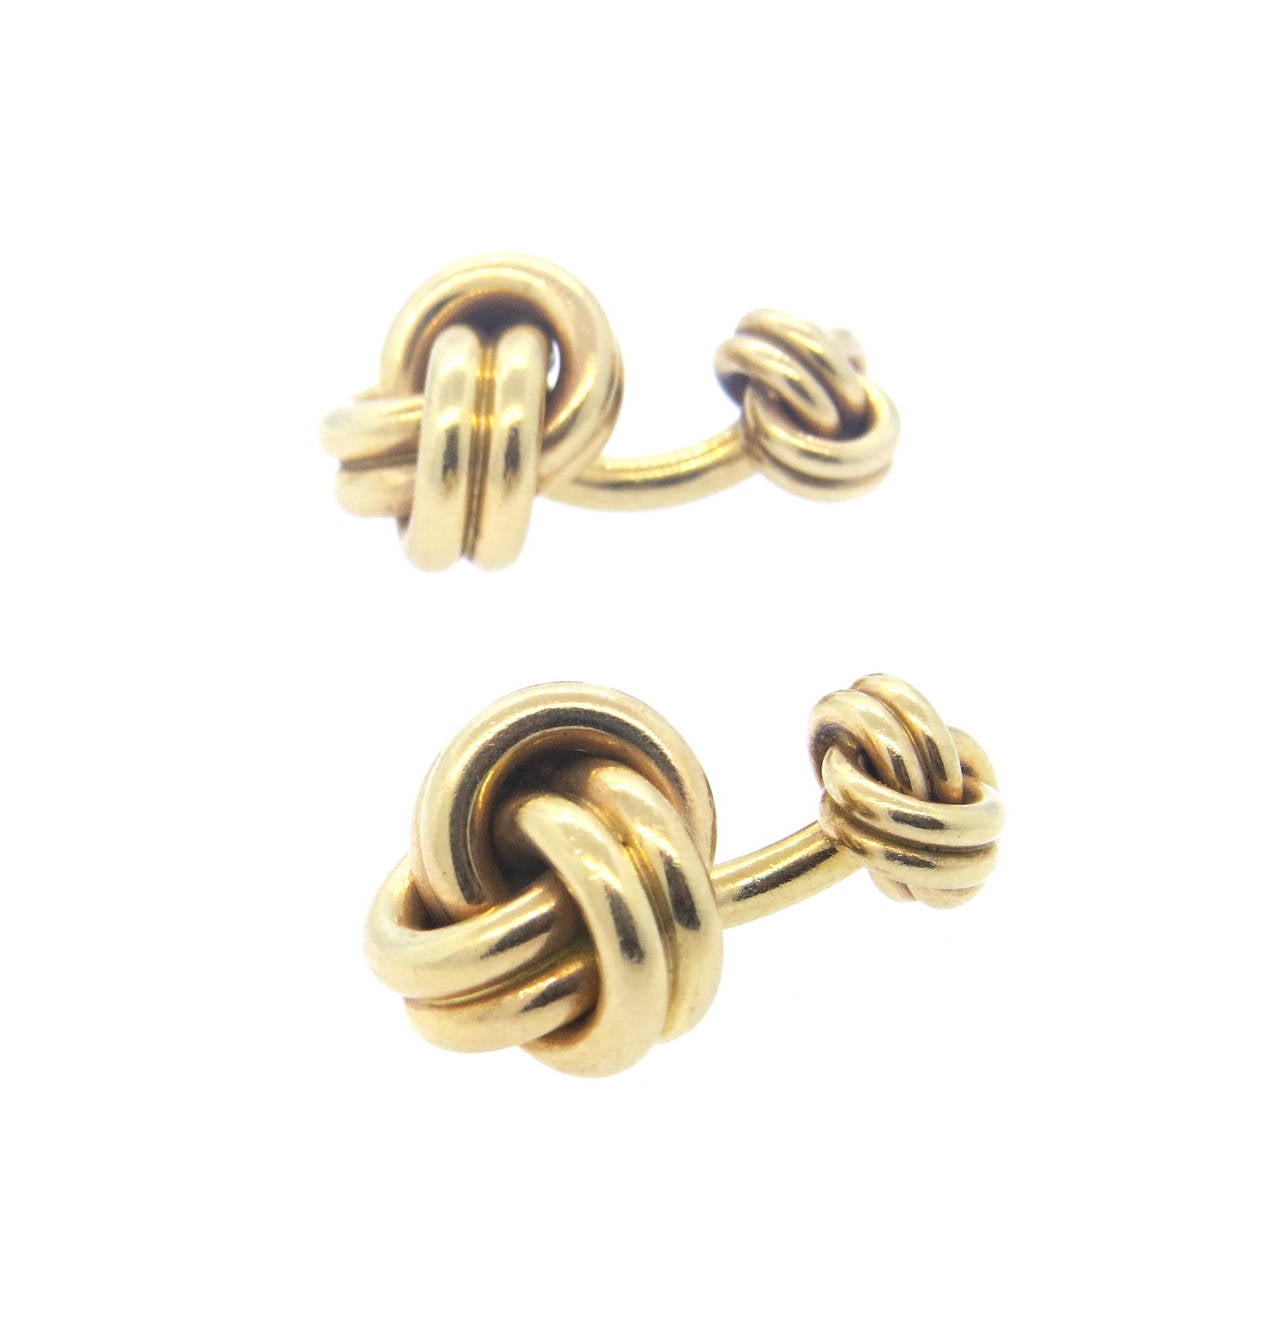 Vintage 14k gold large knot cufflinks,top measuring 16.5mm x 16.5mm, back - 11mm x 11mm. Marked Tiffany & Co,14k. Weight - 31.6 grams